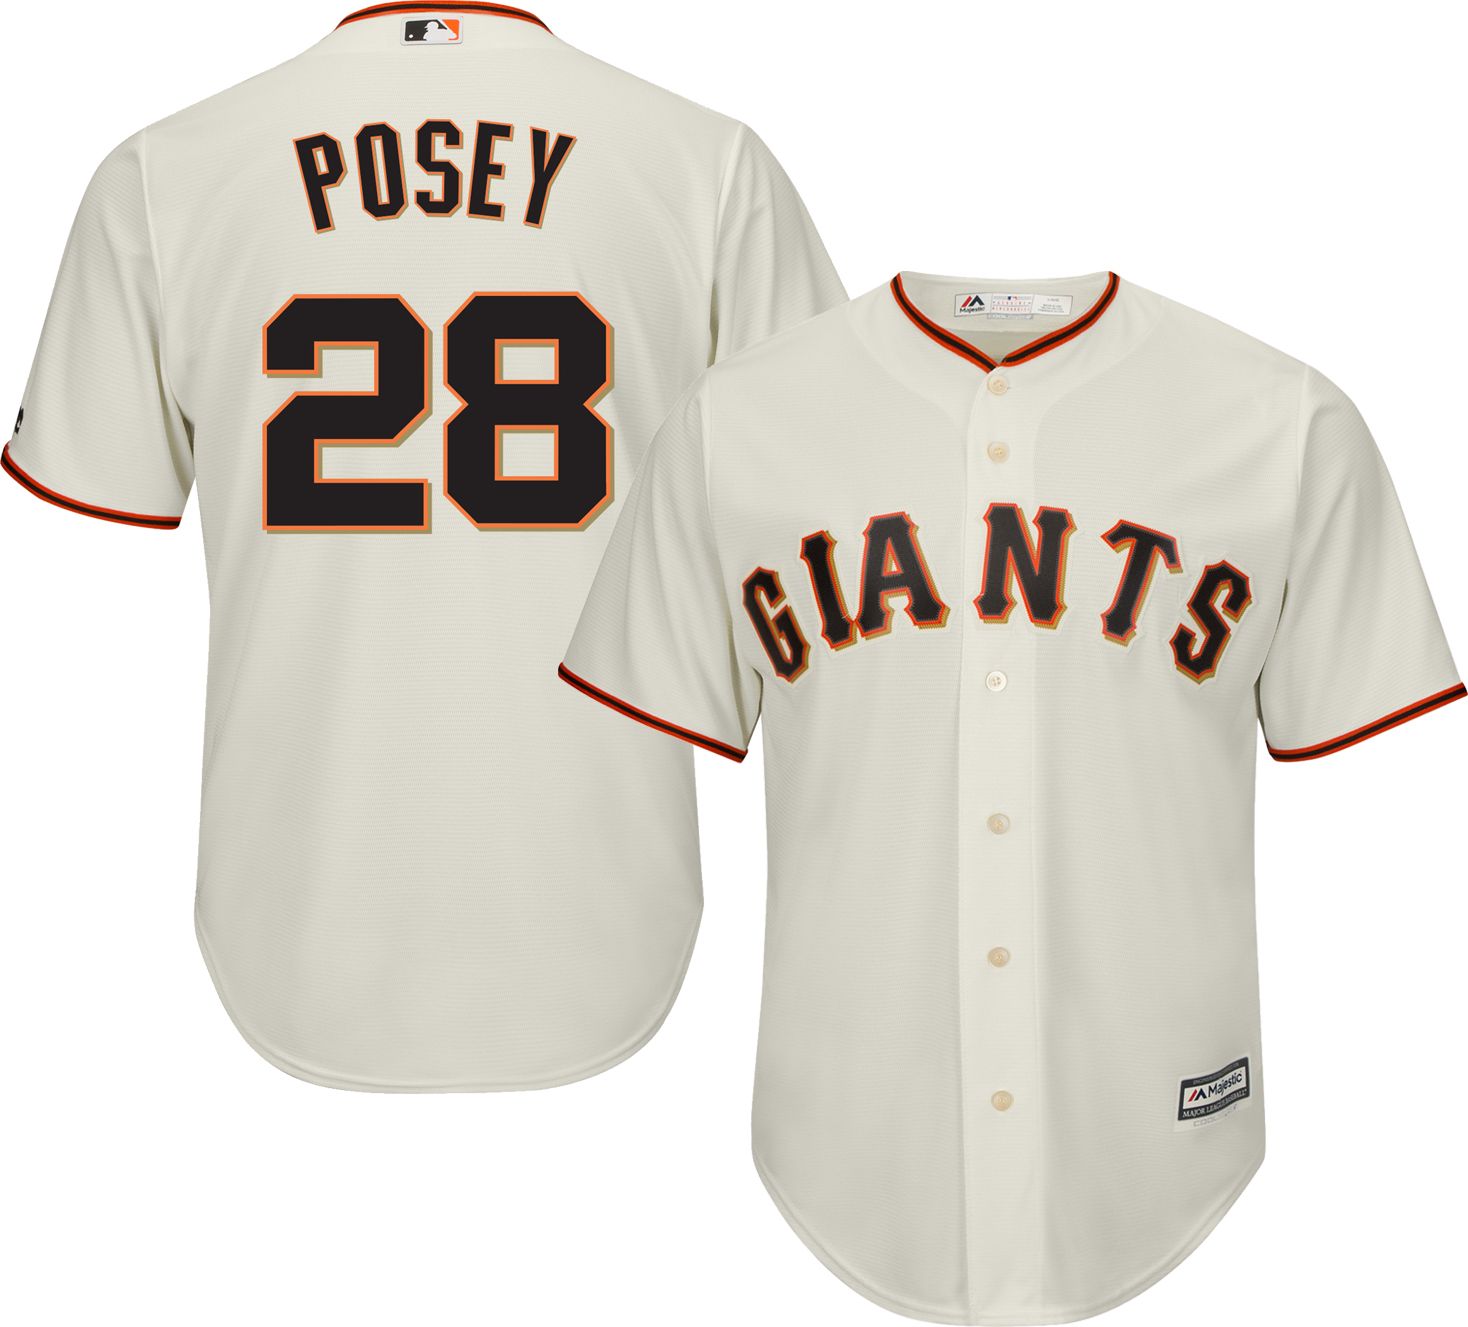 posey jersey